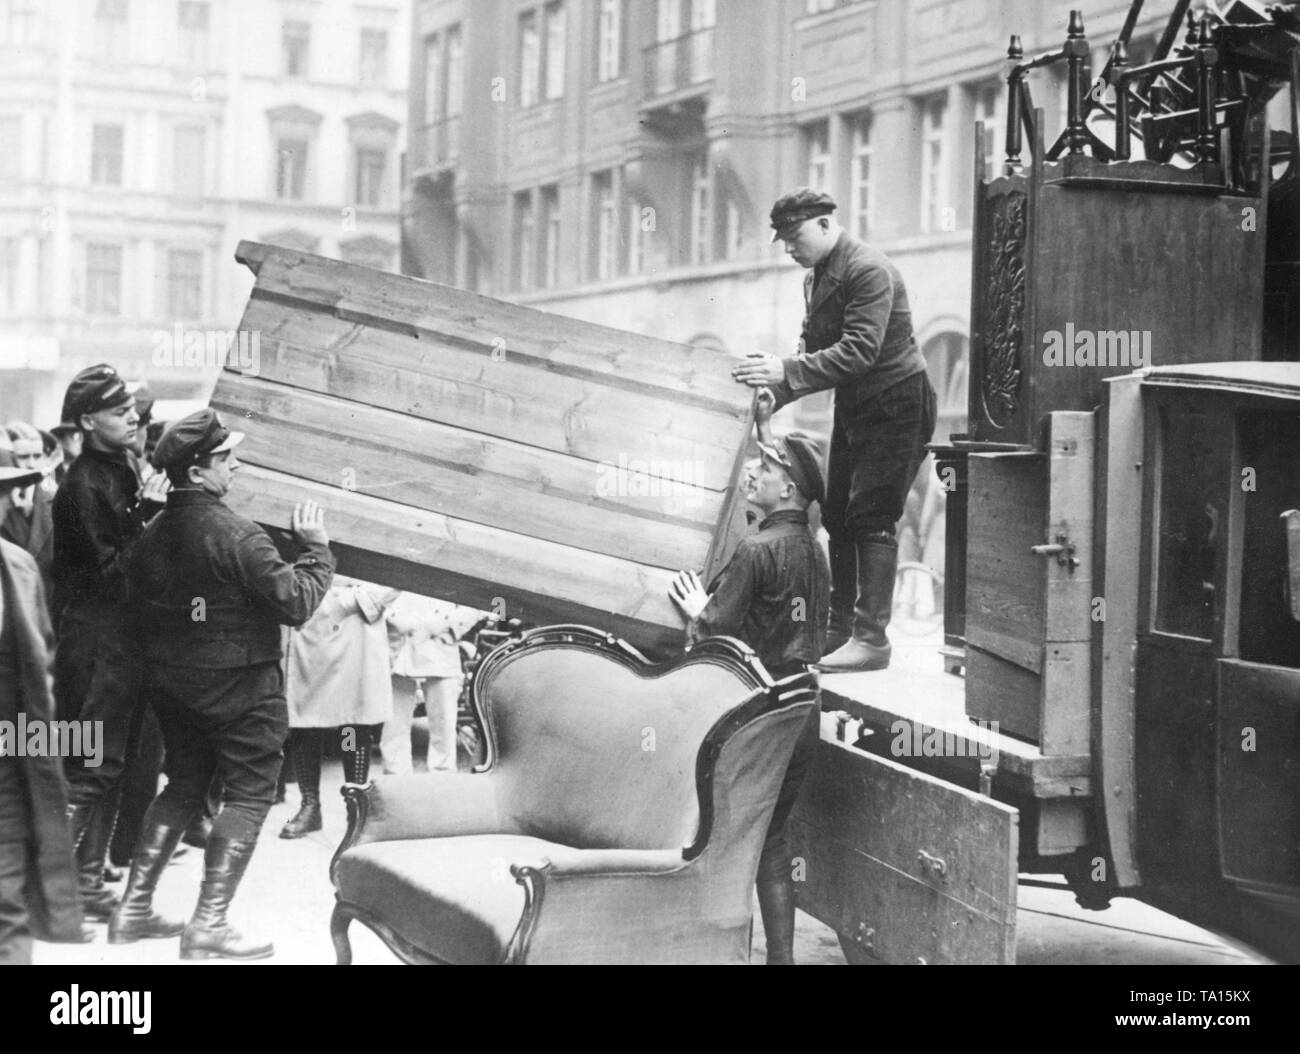 Money shortage and political pressure caused the NSDAP to give up offices again and again. Here pieces of furniture from the previous quarter of the Gau leadership of the Nazi Party in the Hedemannstrasse are forcibly cart away. Stock Photo